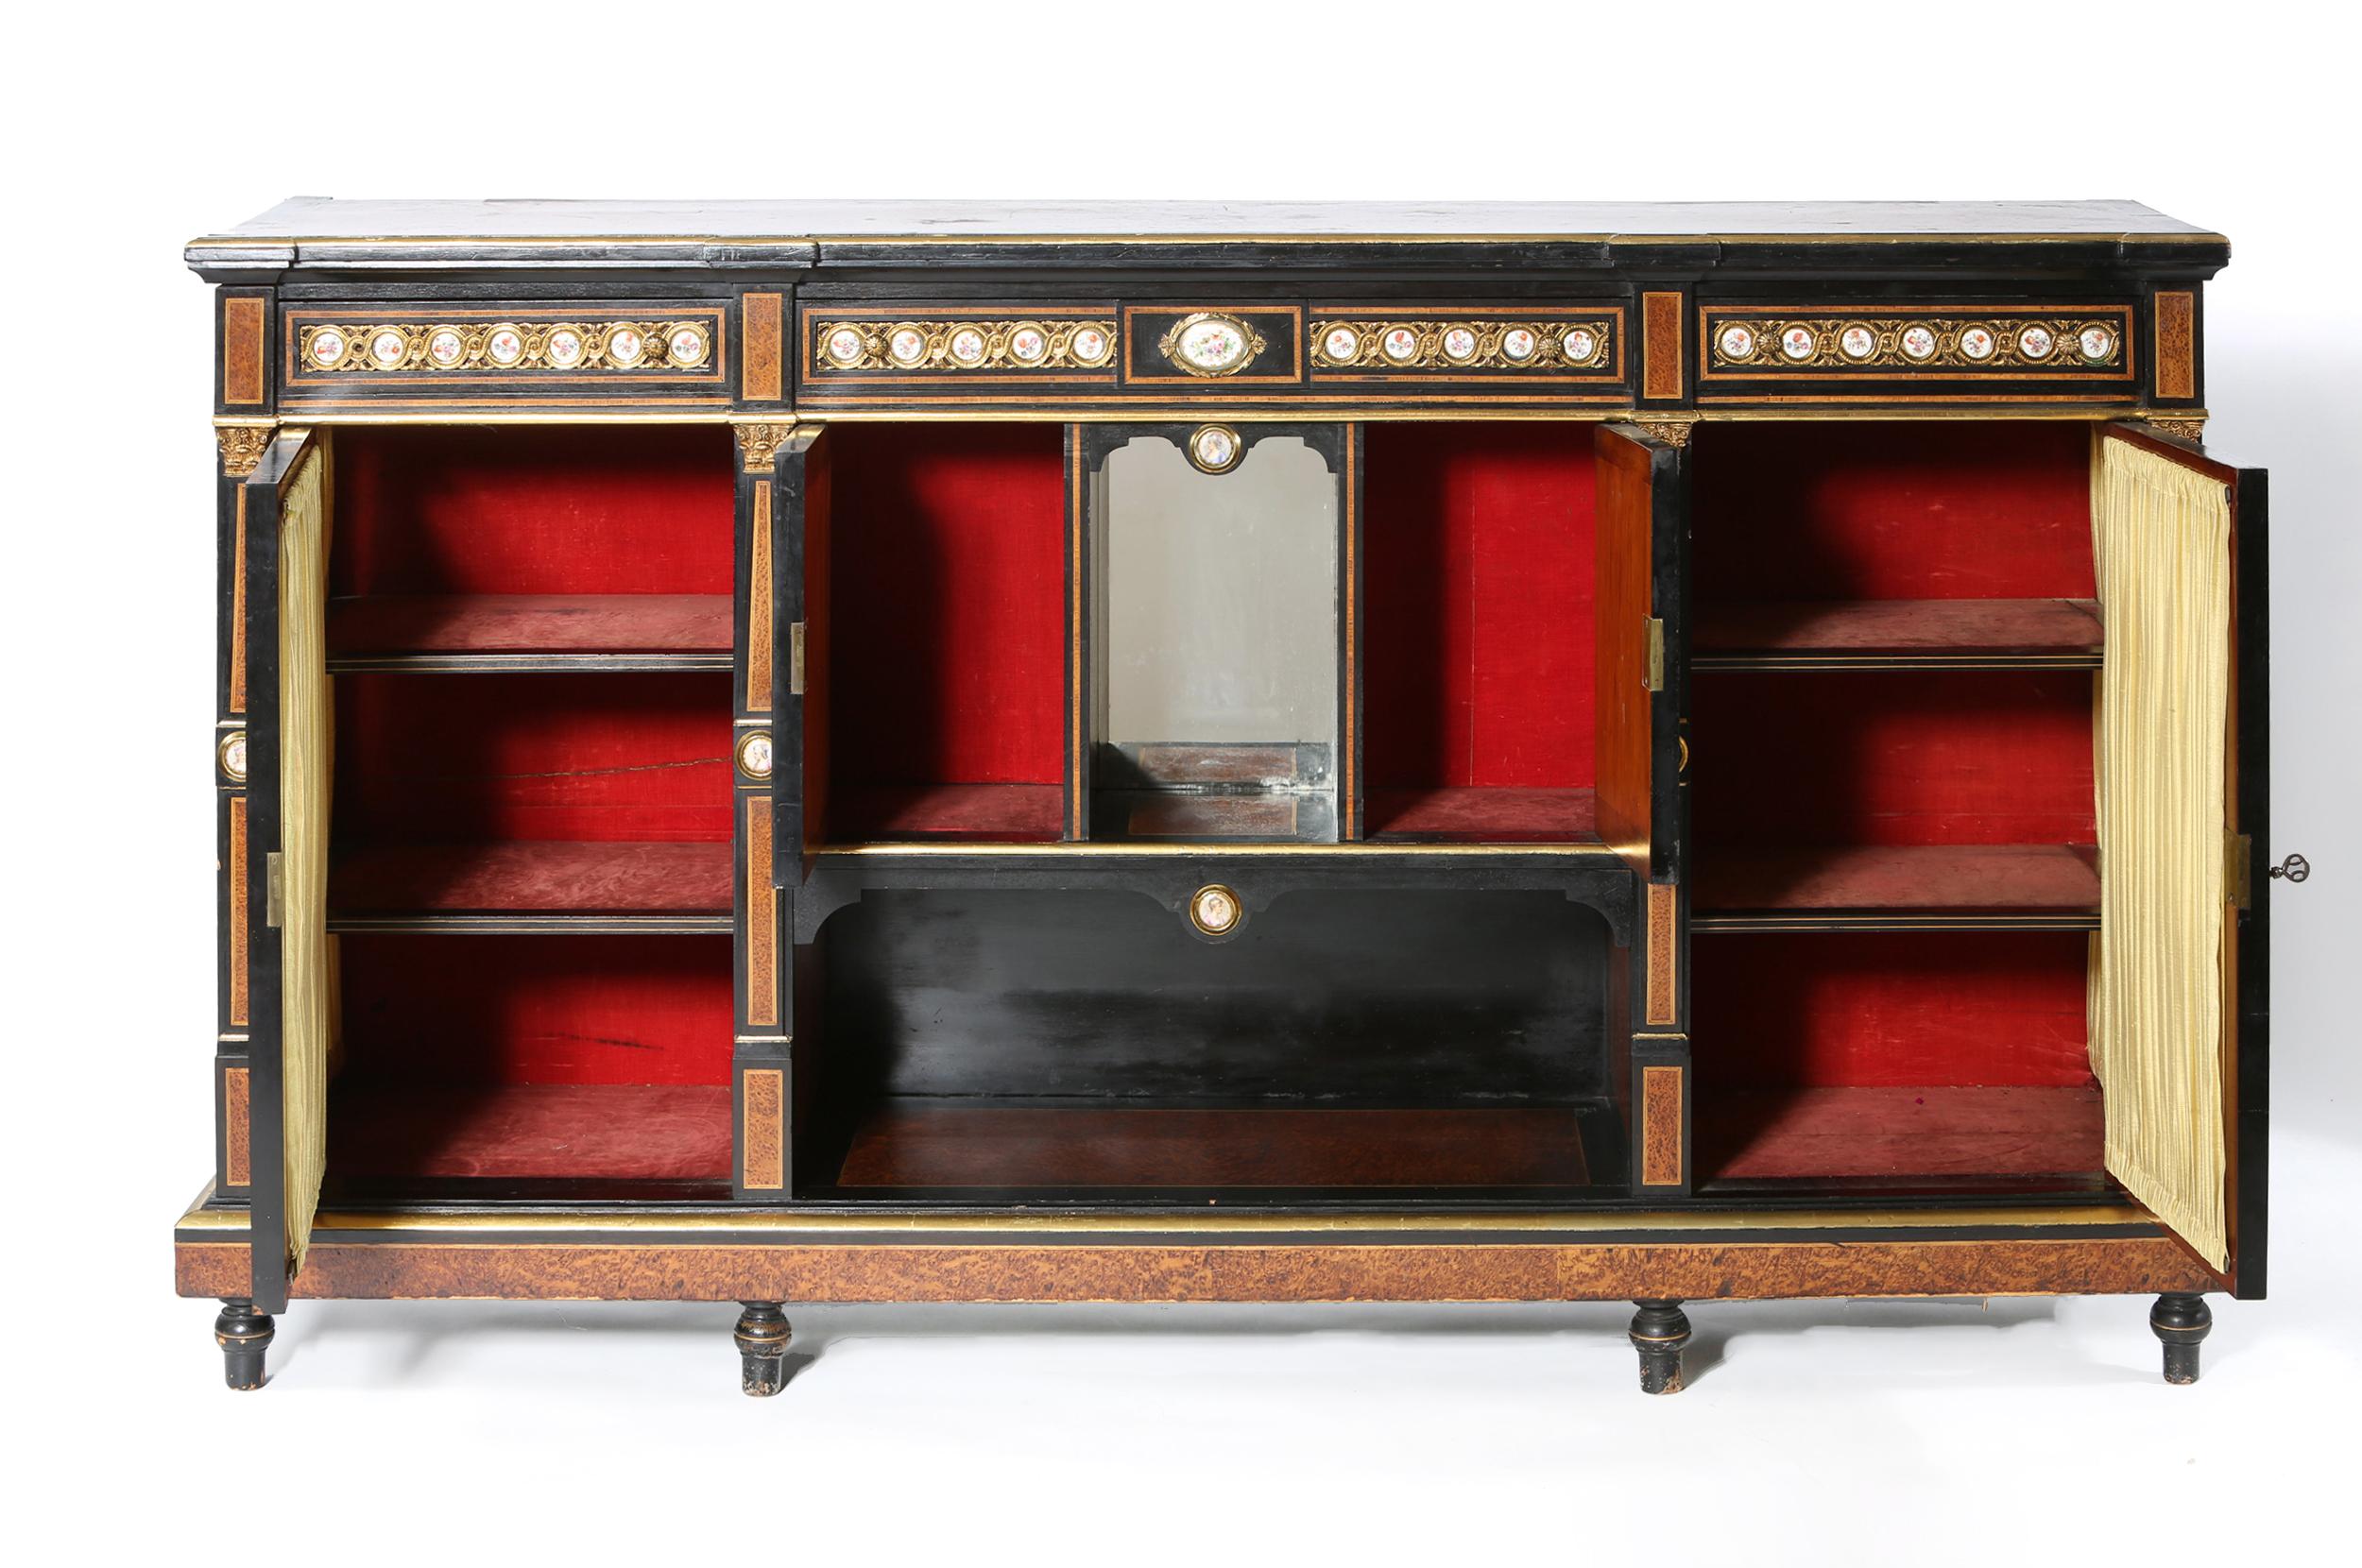 Early 19th century Louis XVI style ebonized fruitwood parquetry with inlaid porcelain and inserted guilloche gilt brass insert. The front of cabinet / sideboard has polychrome decorated porcelain plaques centering two portrait plaque inserted at the